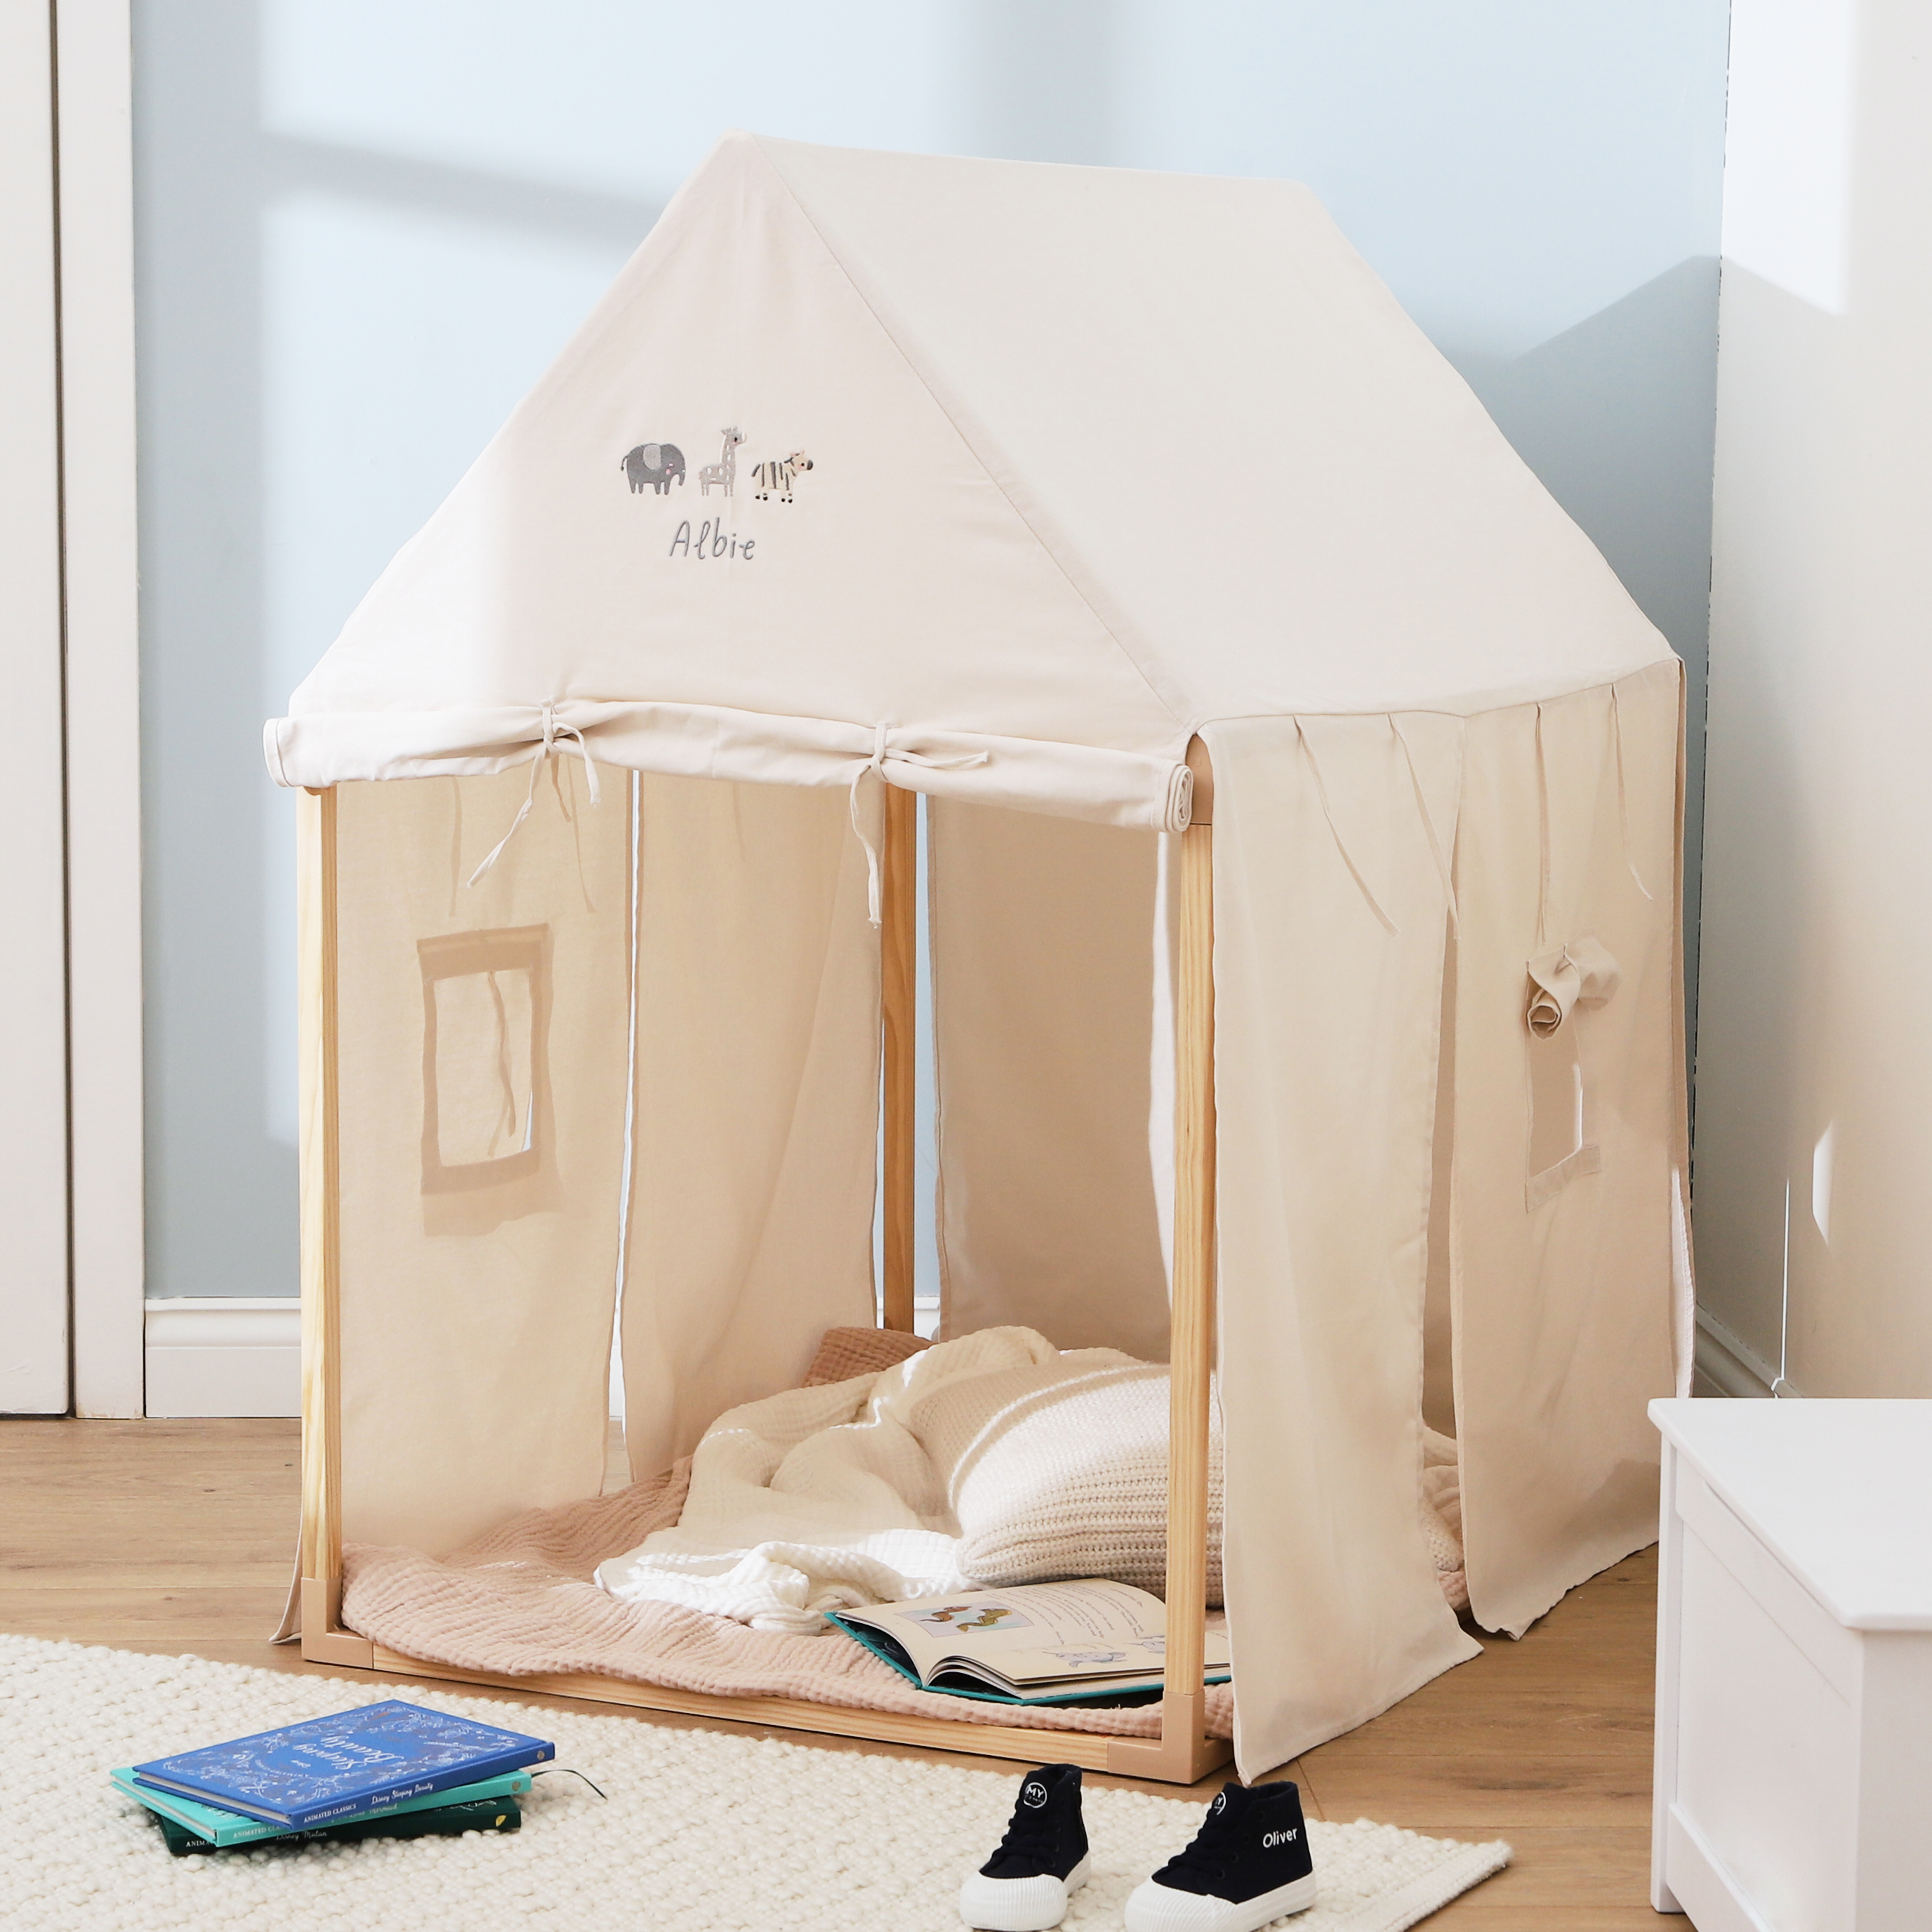 Personalised Kids Concept Safari Play House Tent